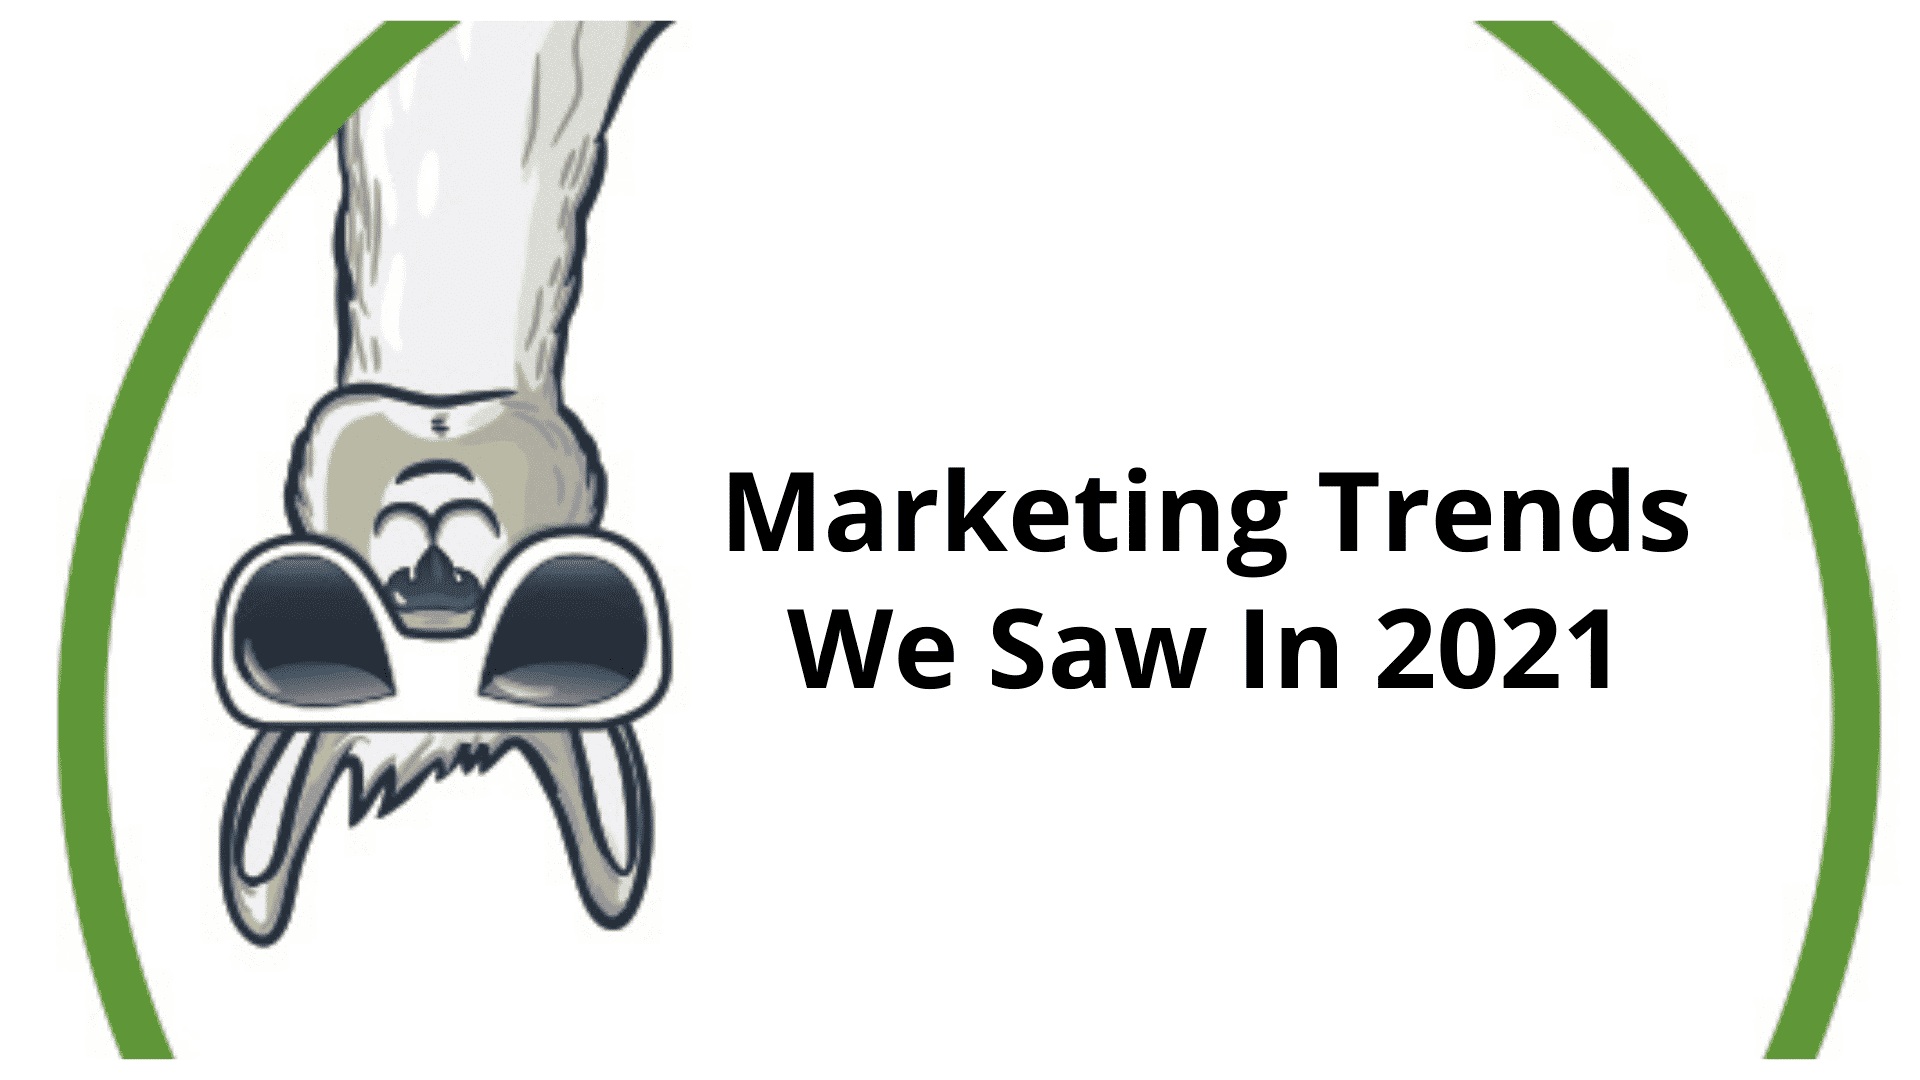 Marketing Changes and Trends We Saw In 2021